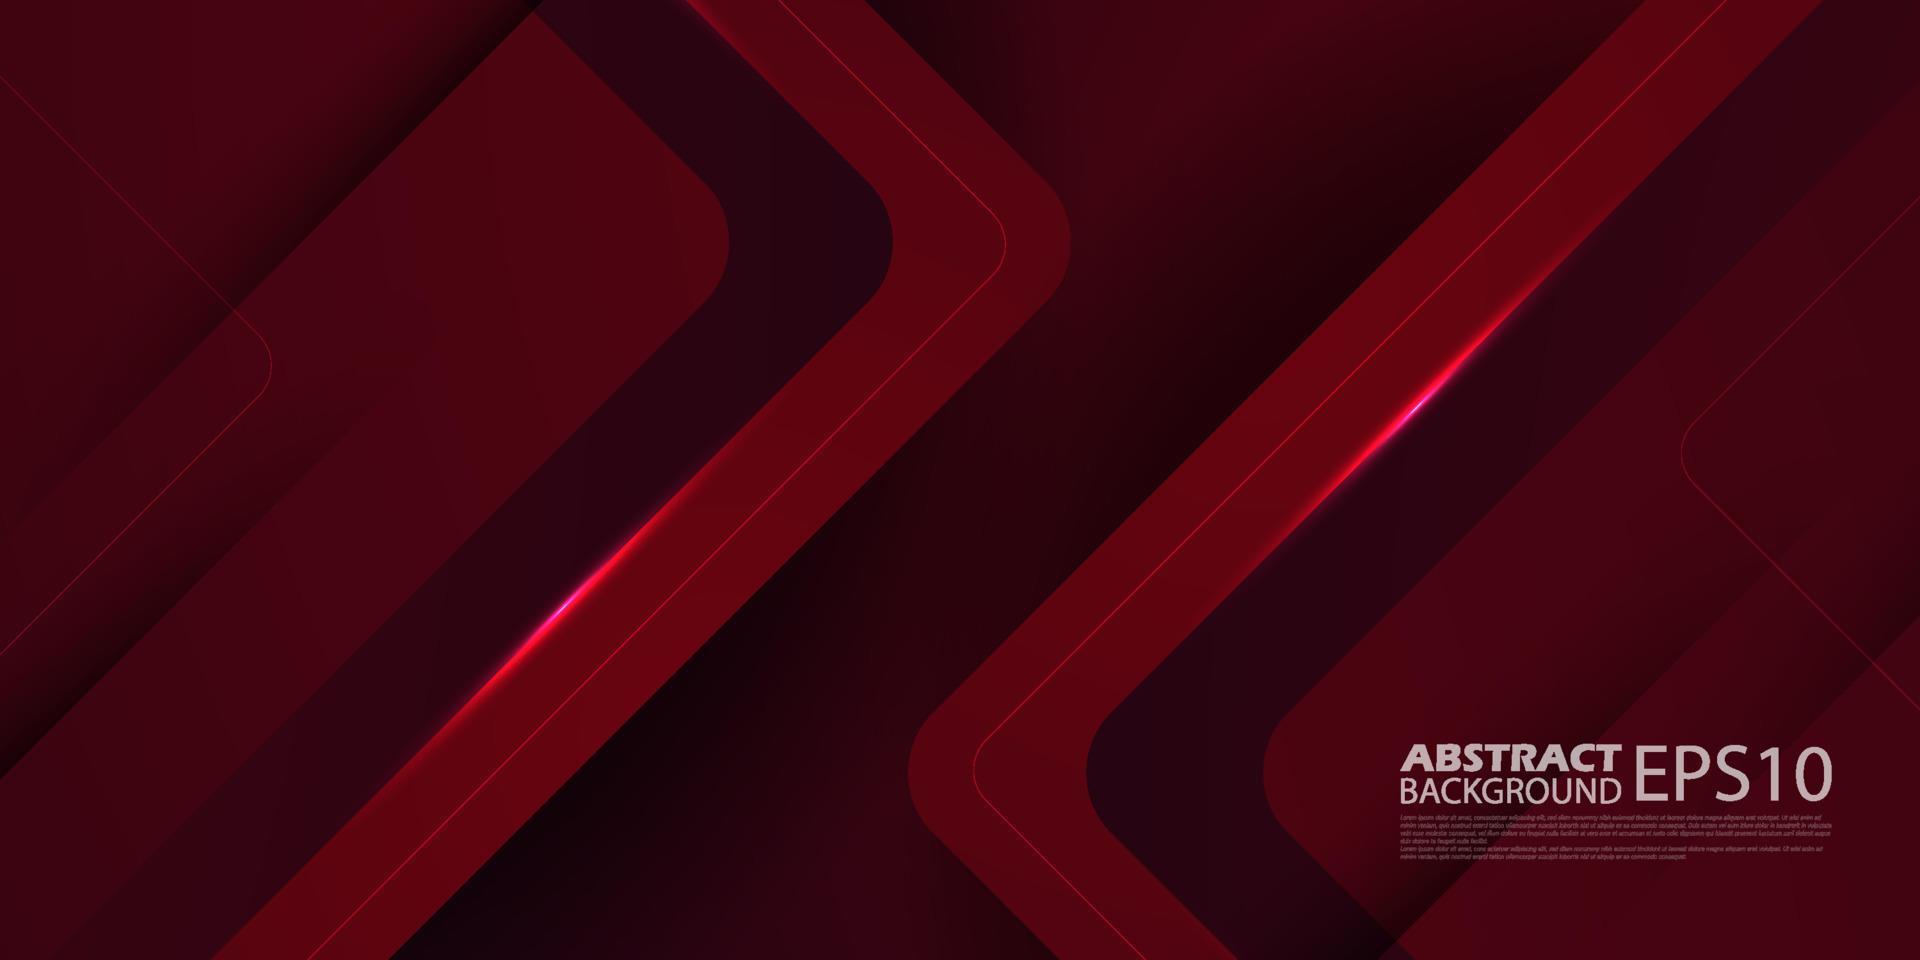 Futuristic design dark red triangle geometric vector background overlap layer on black space for text and background. Eps10 vector